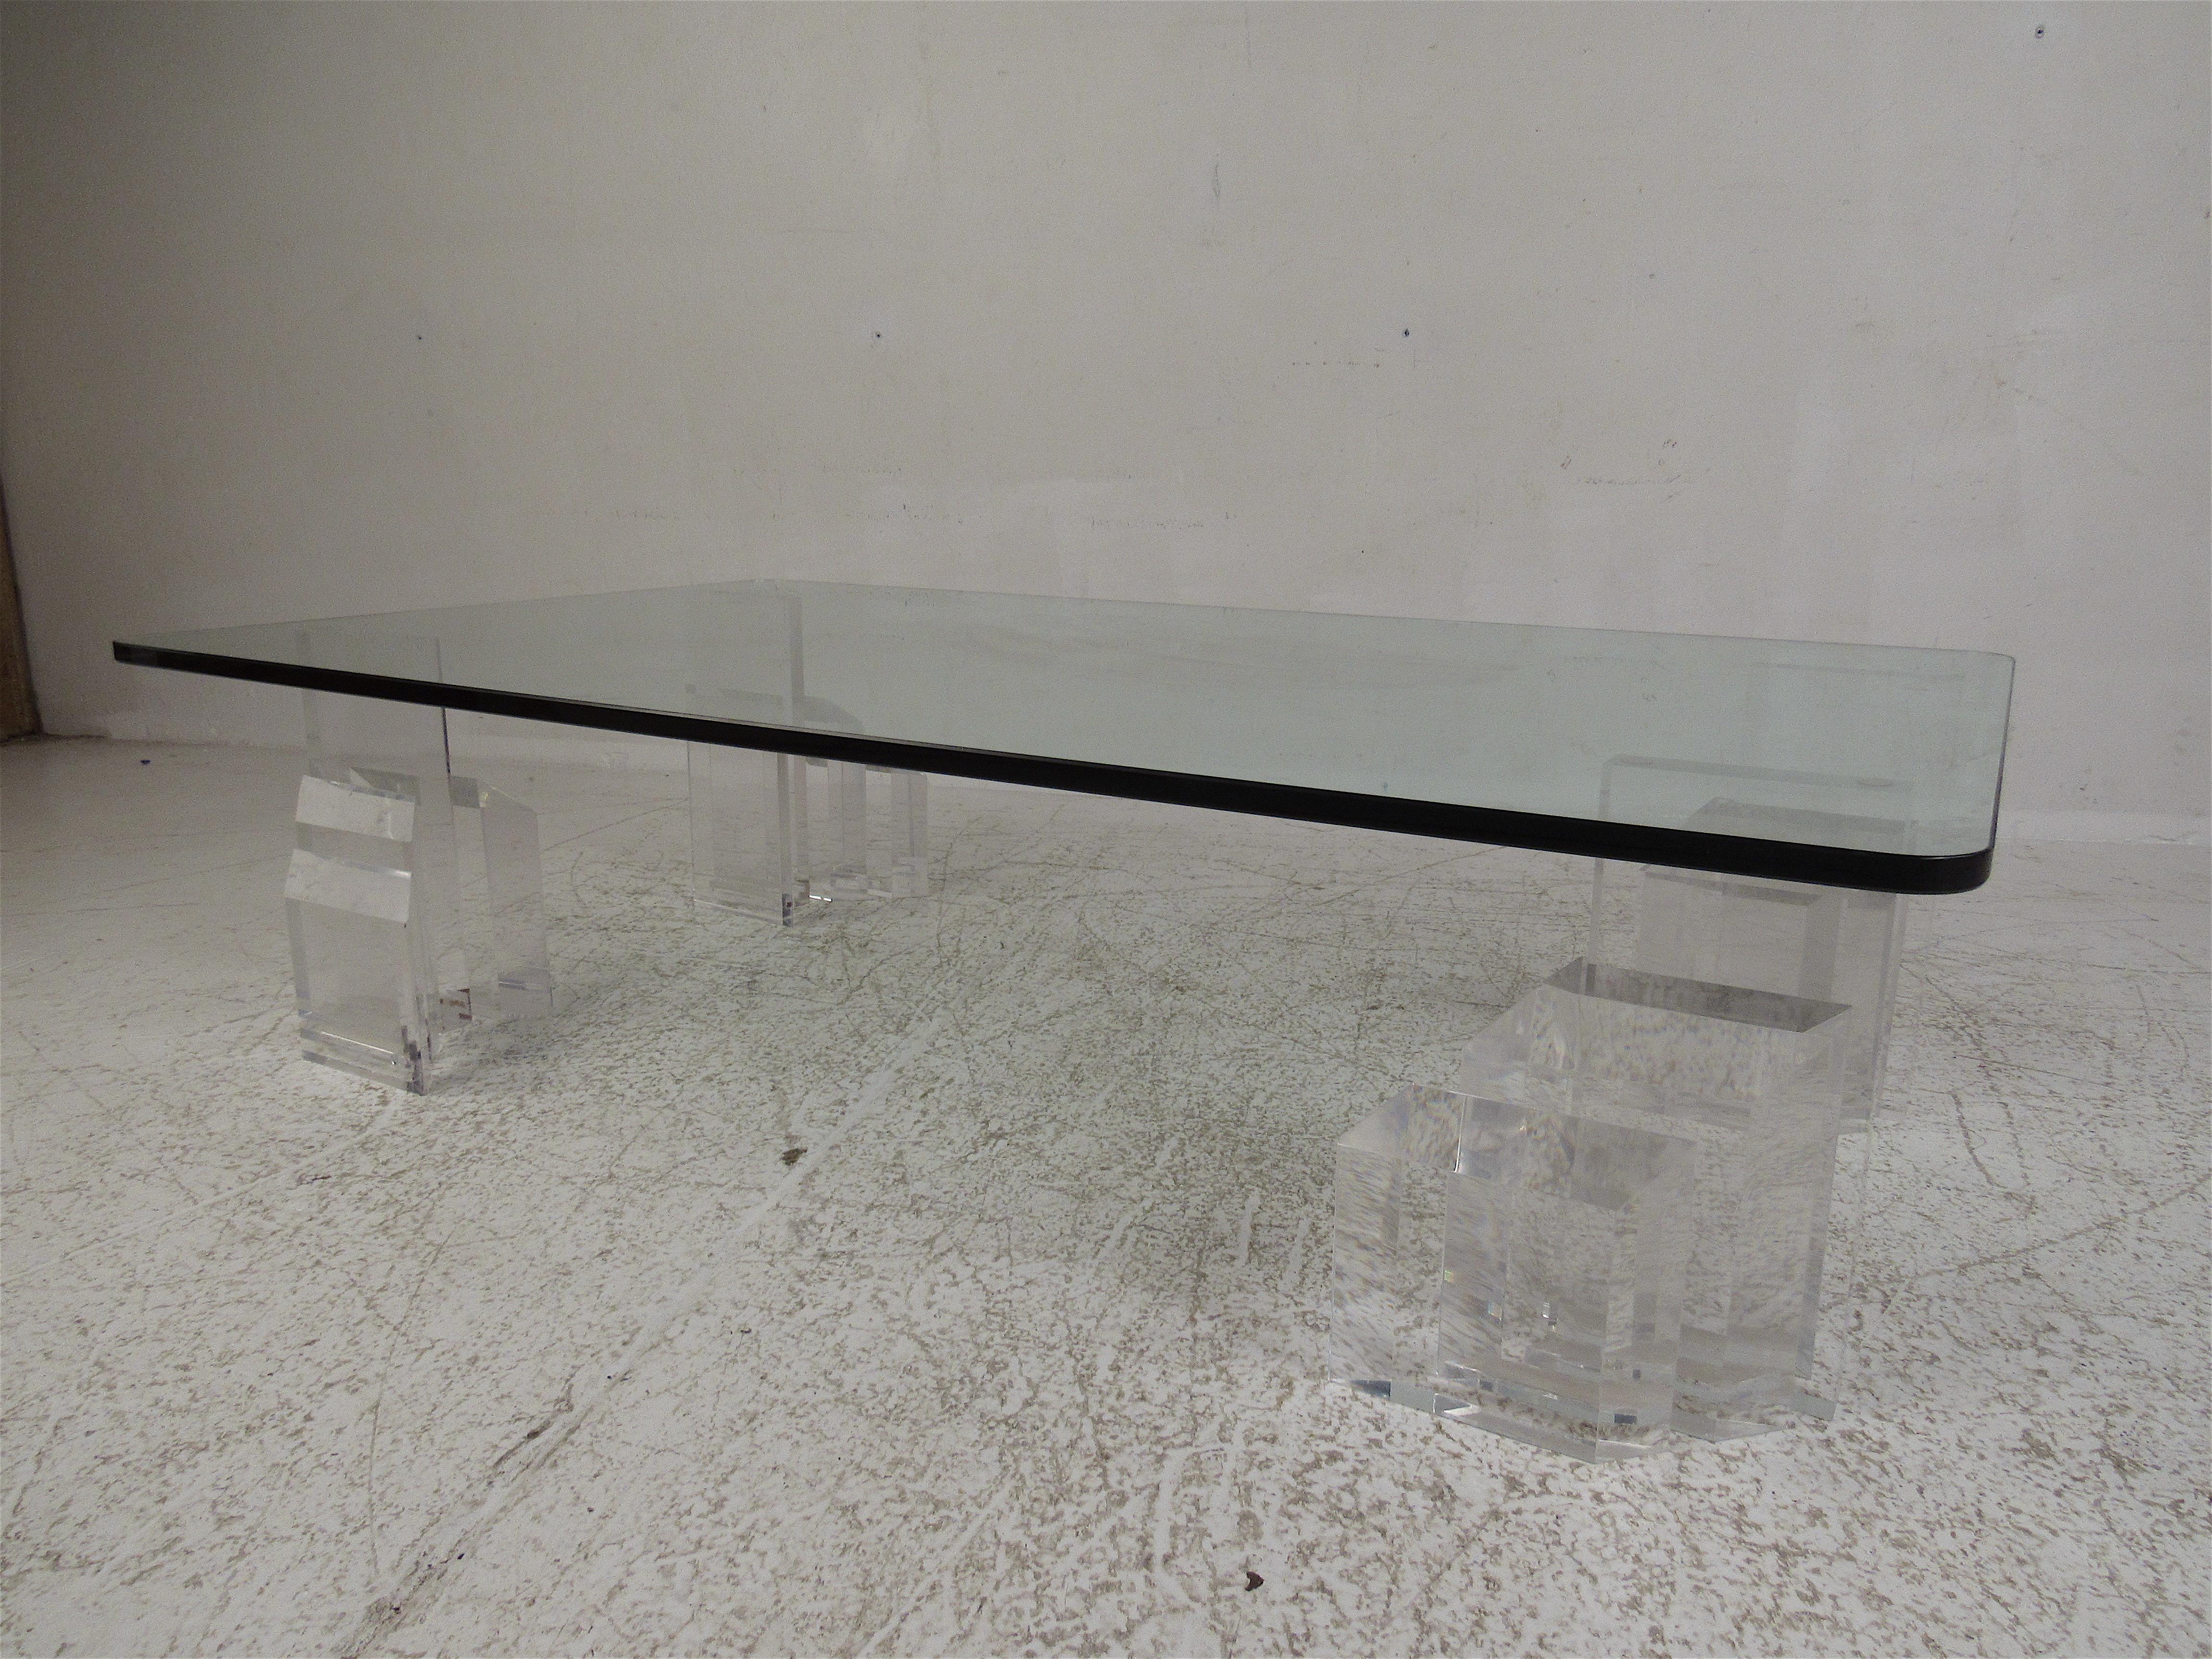 This stunning vintage modern coffee table boasts a large rectangular glass top with a light tint of green. An unusual design with four individual Lucite pieces. An elegant graduated design with beveled edges makes this base stand out from the rest.